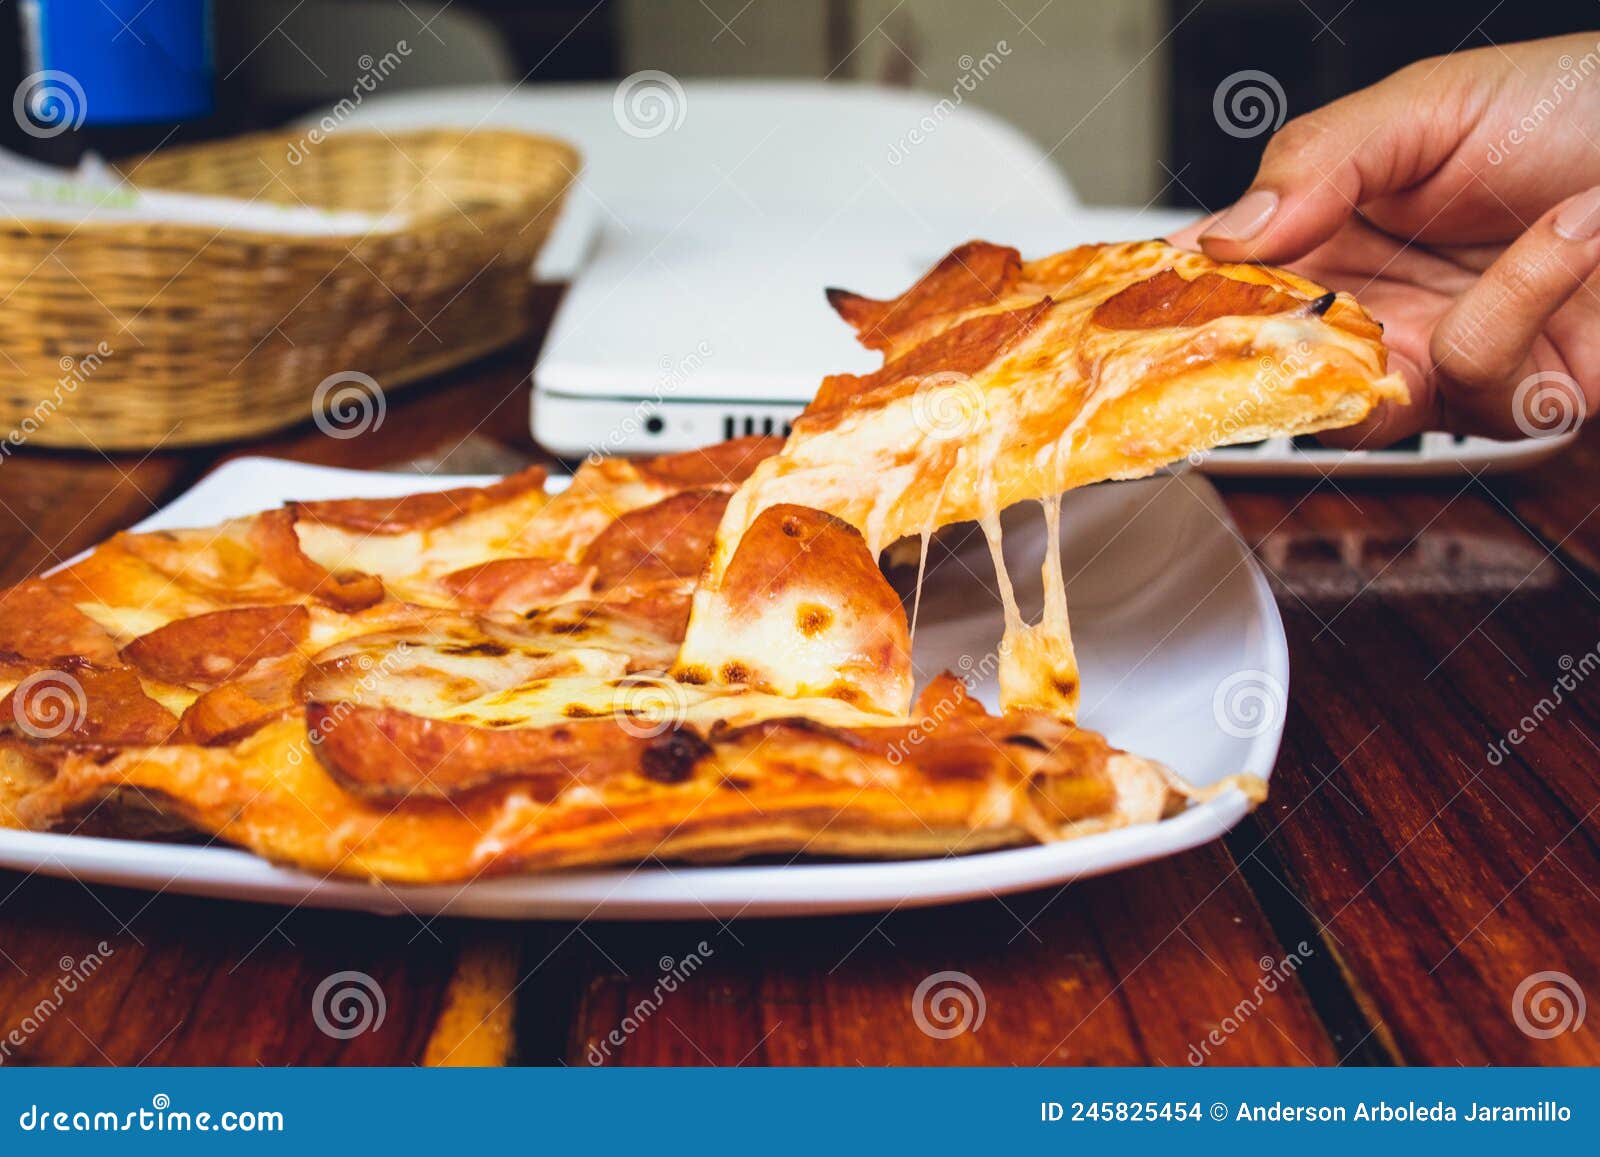 person's hand holding piece of pizza in restaurant